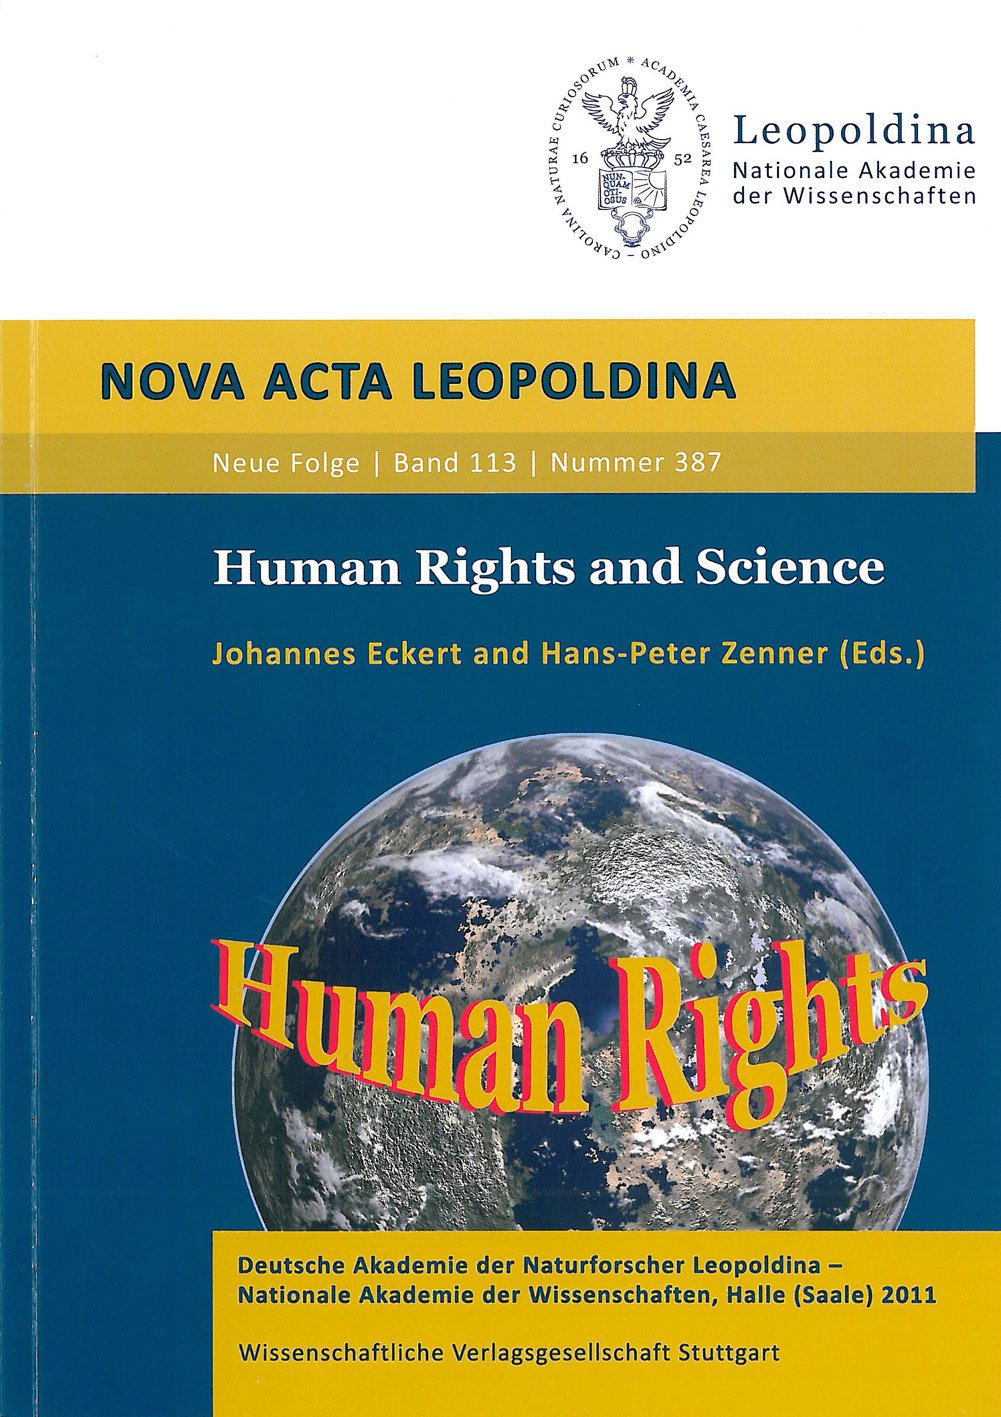 Human Rights and Science